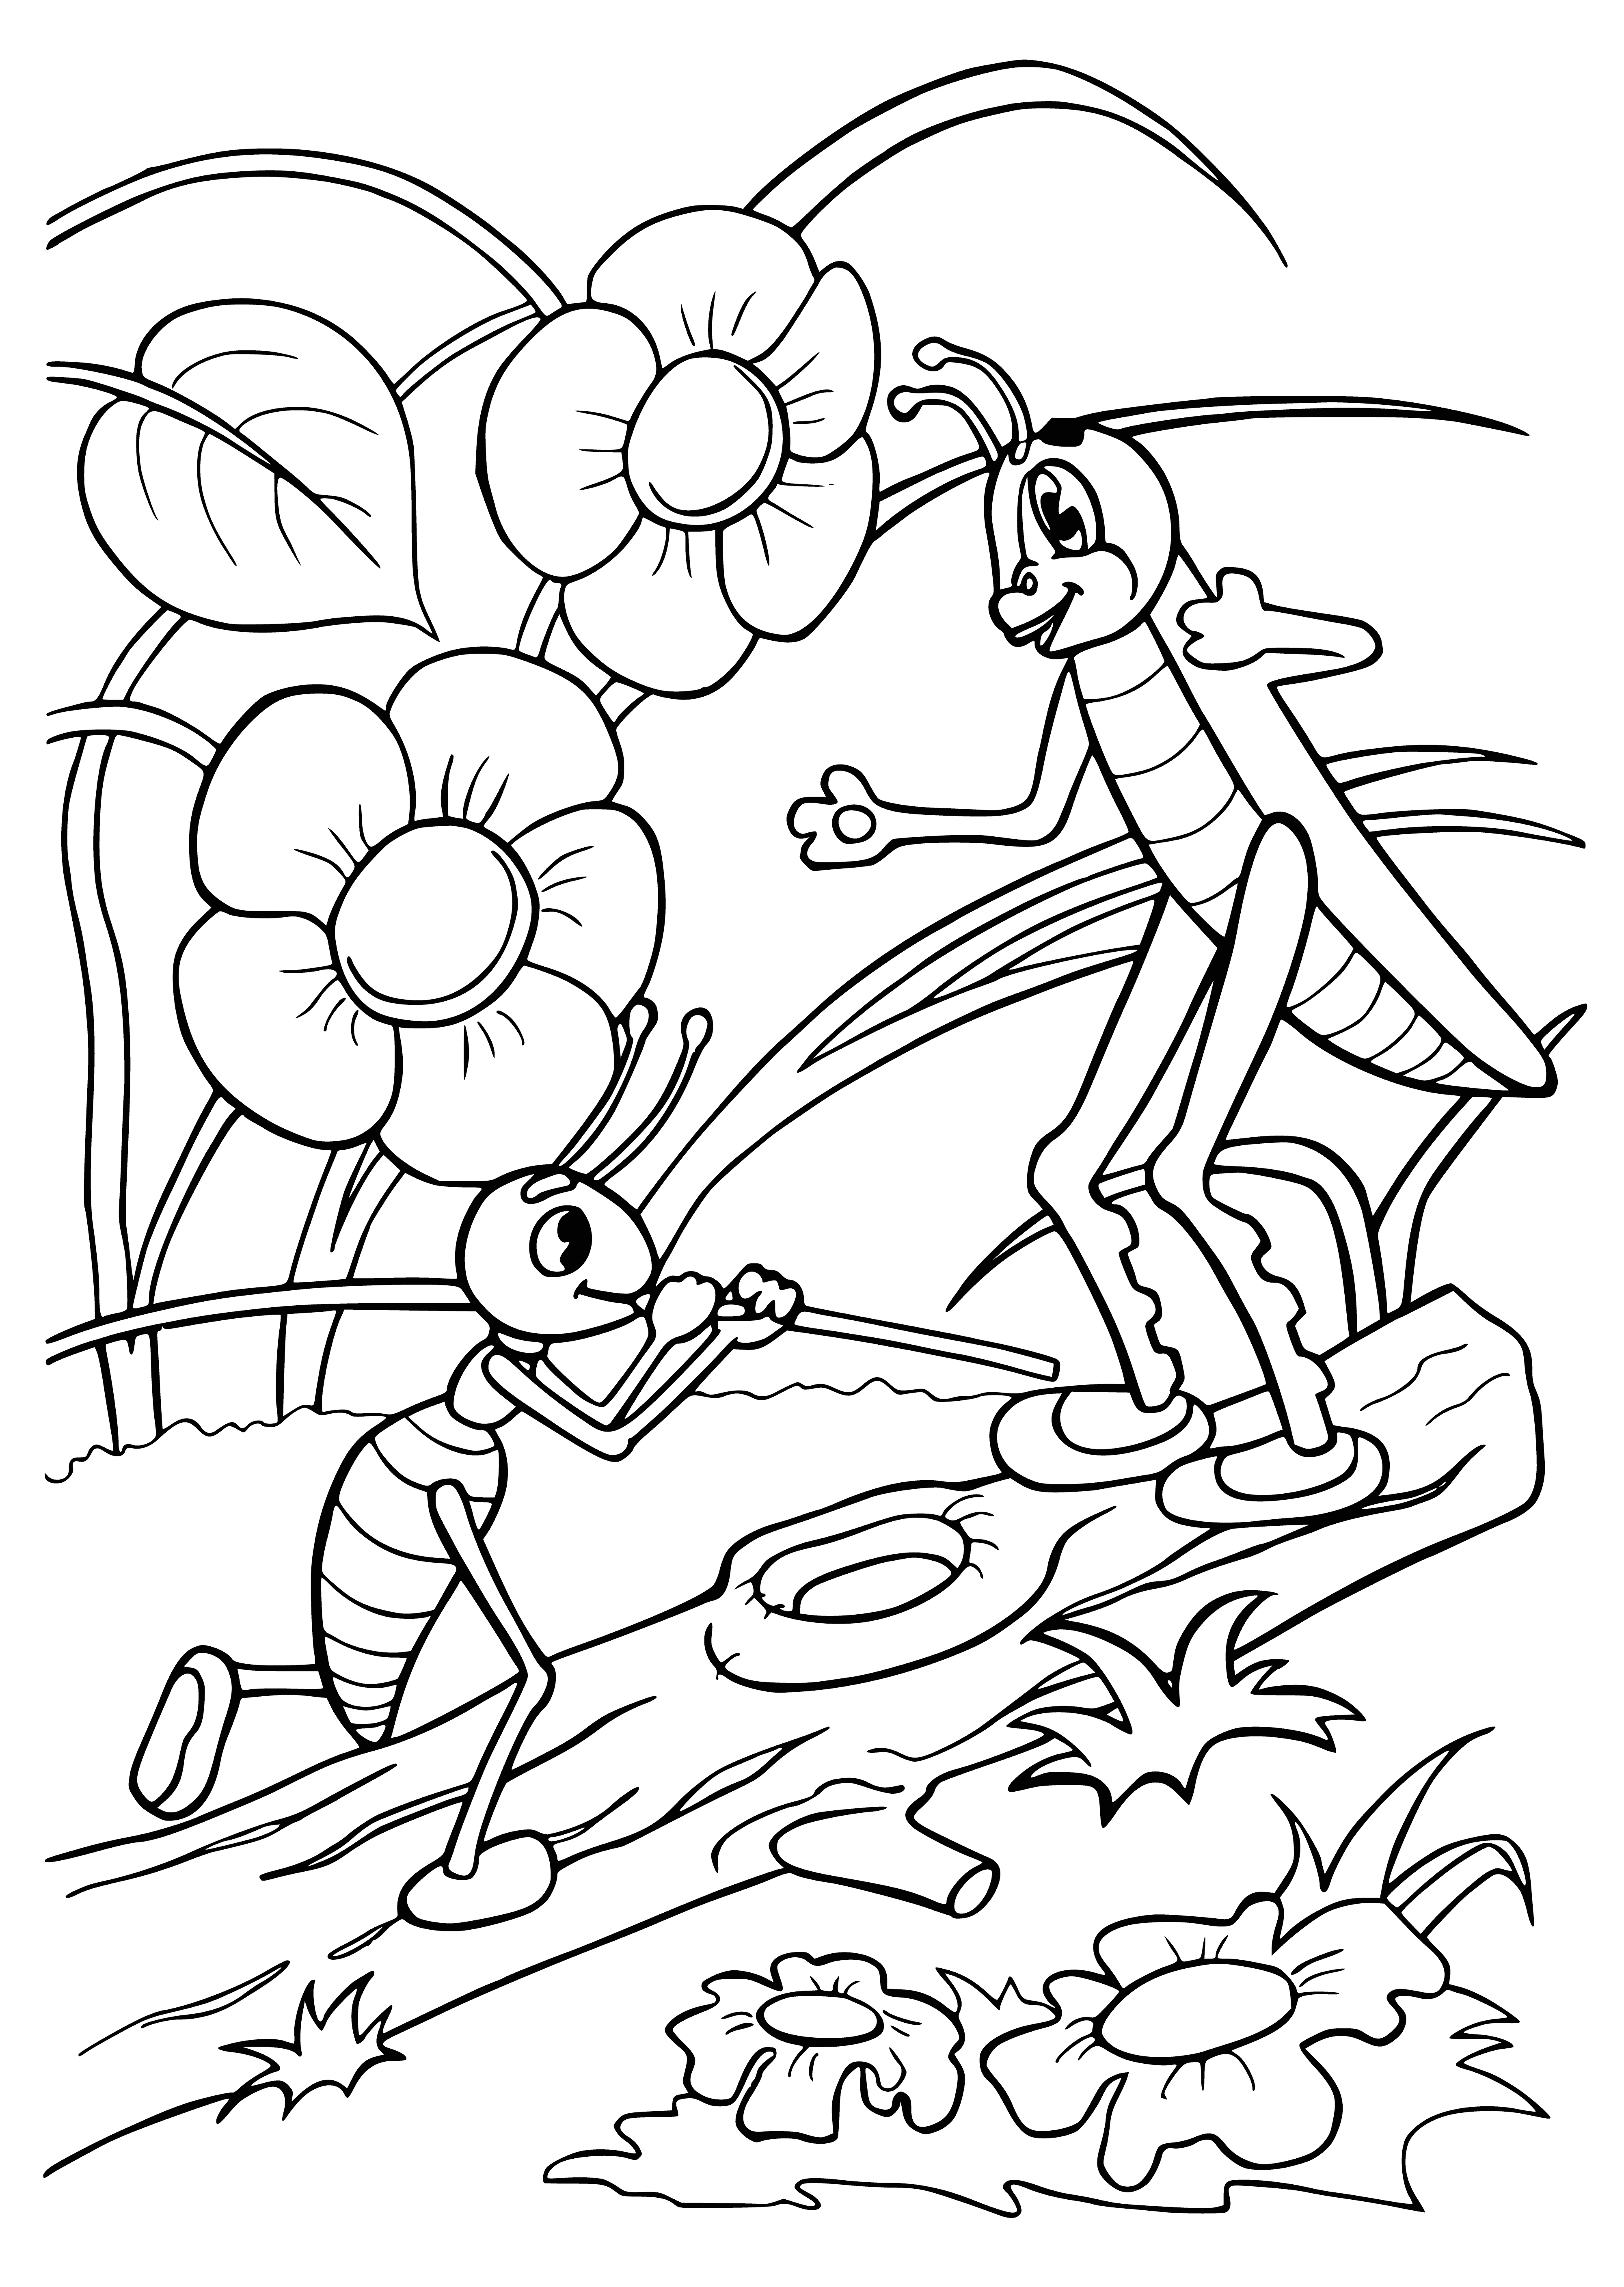 coloring page: Ant crawls on the ground, grasshopper sits on mushroom; legs crossed, hands behind back.